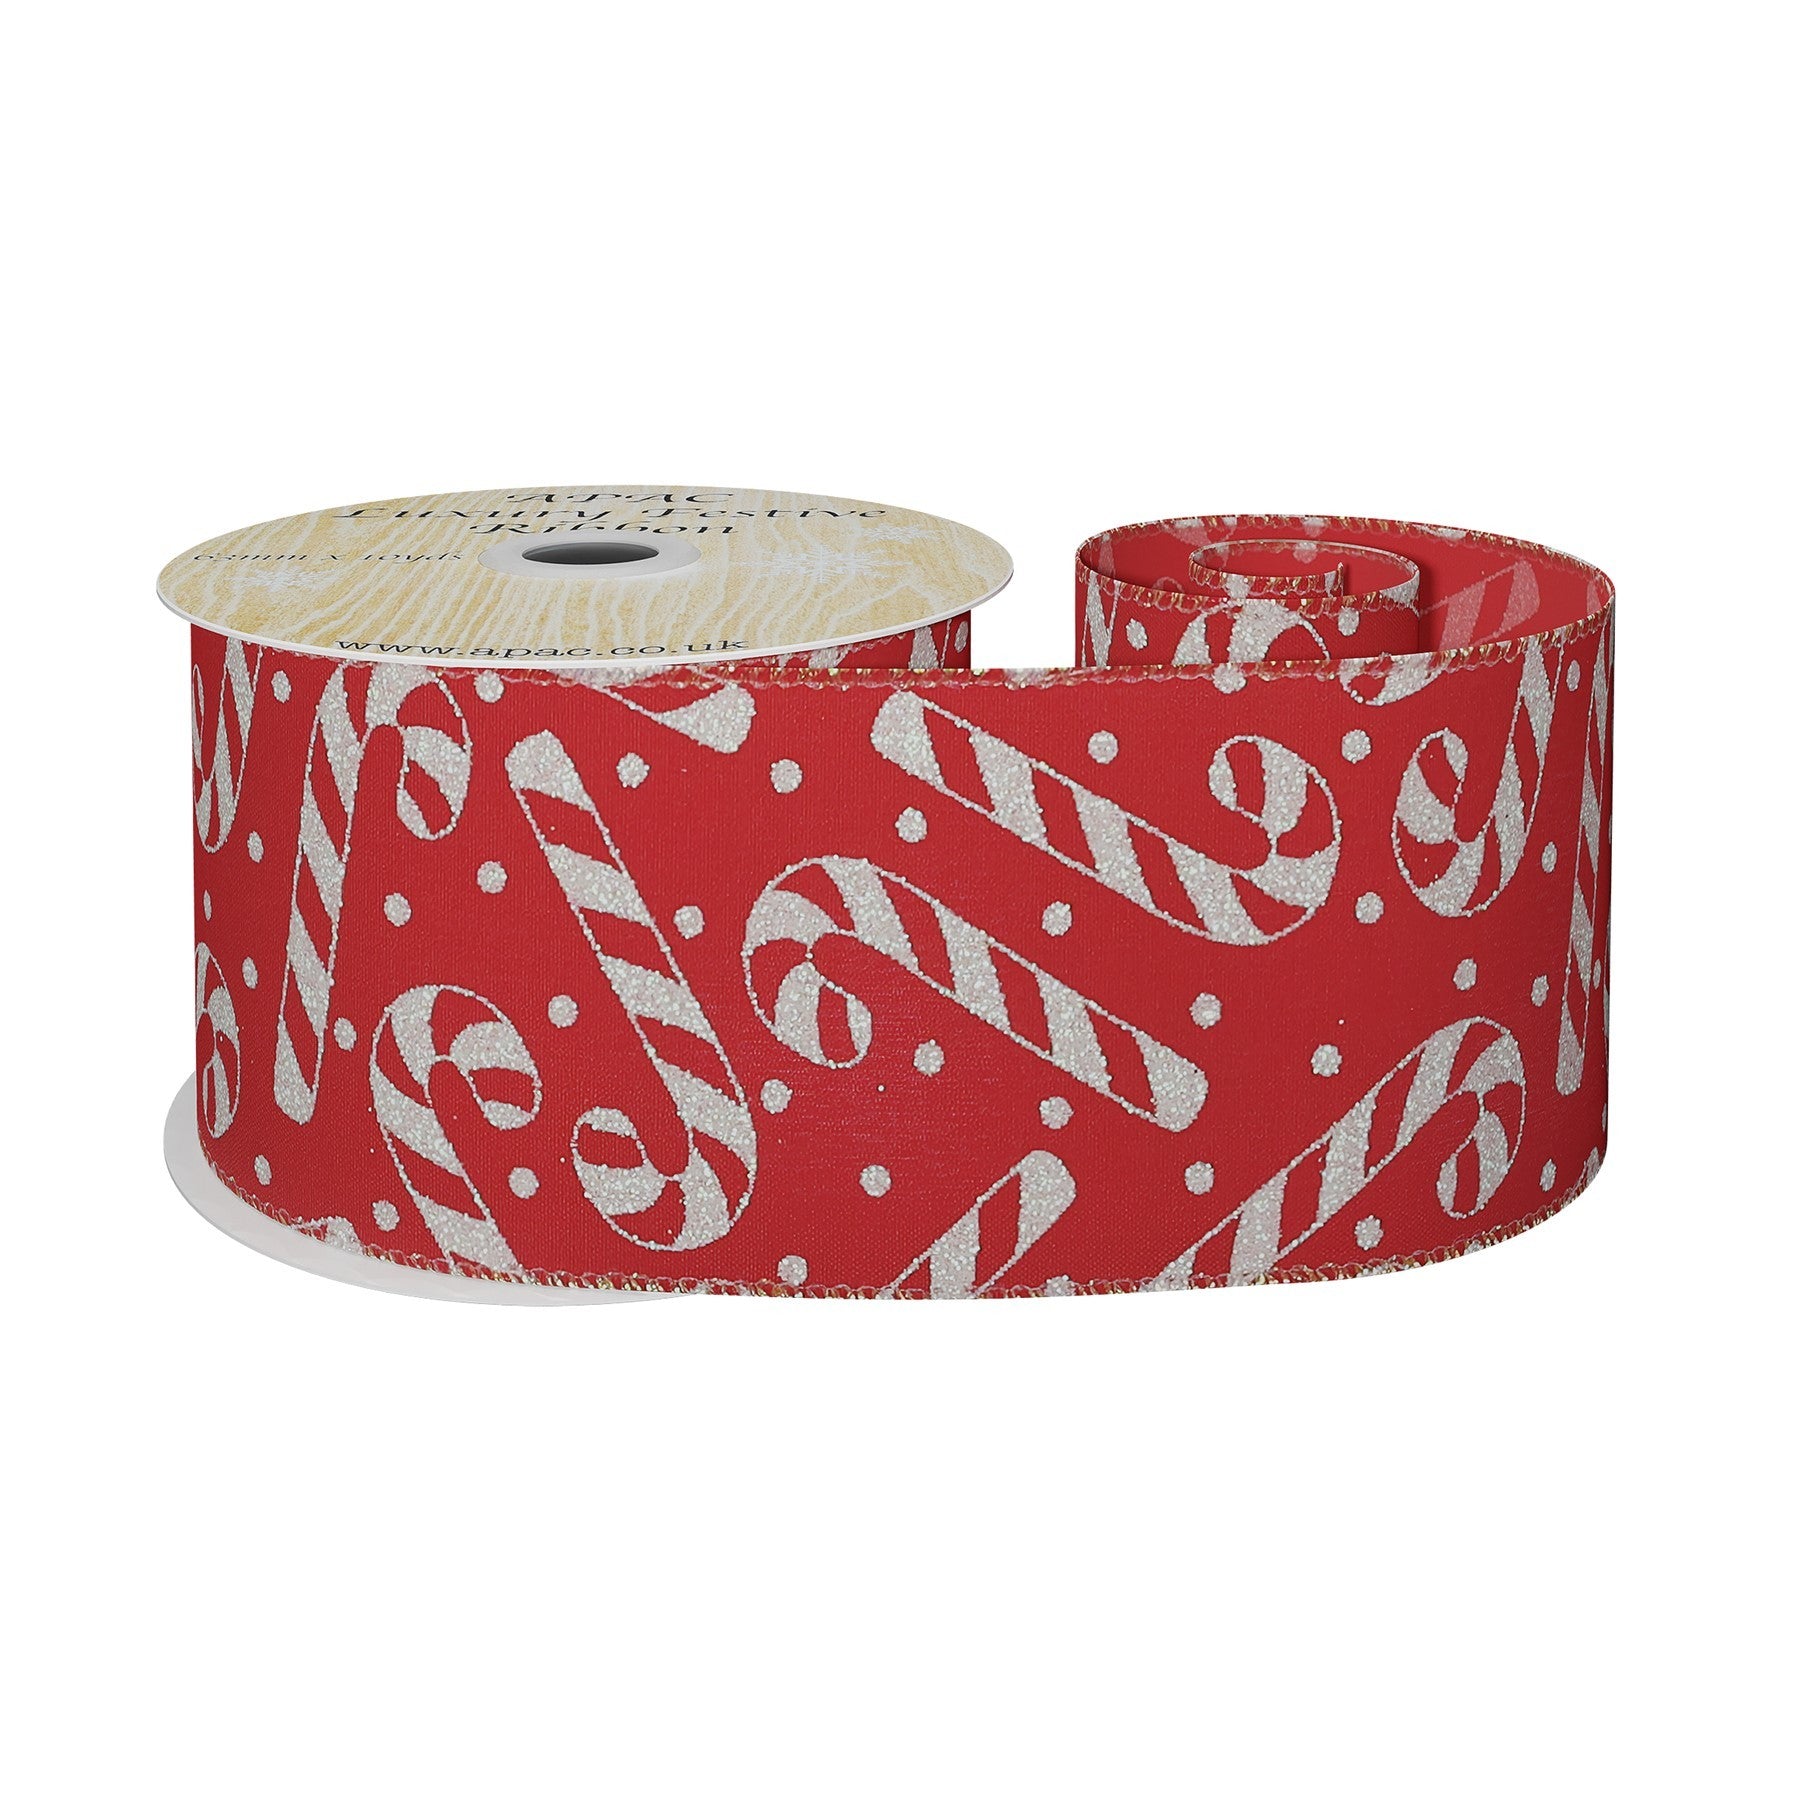 View Red Wired Ribbon with Candy Cane Design 63mm x 10 yards information